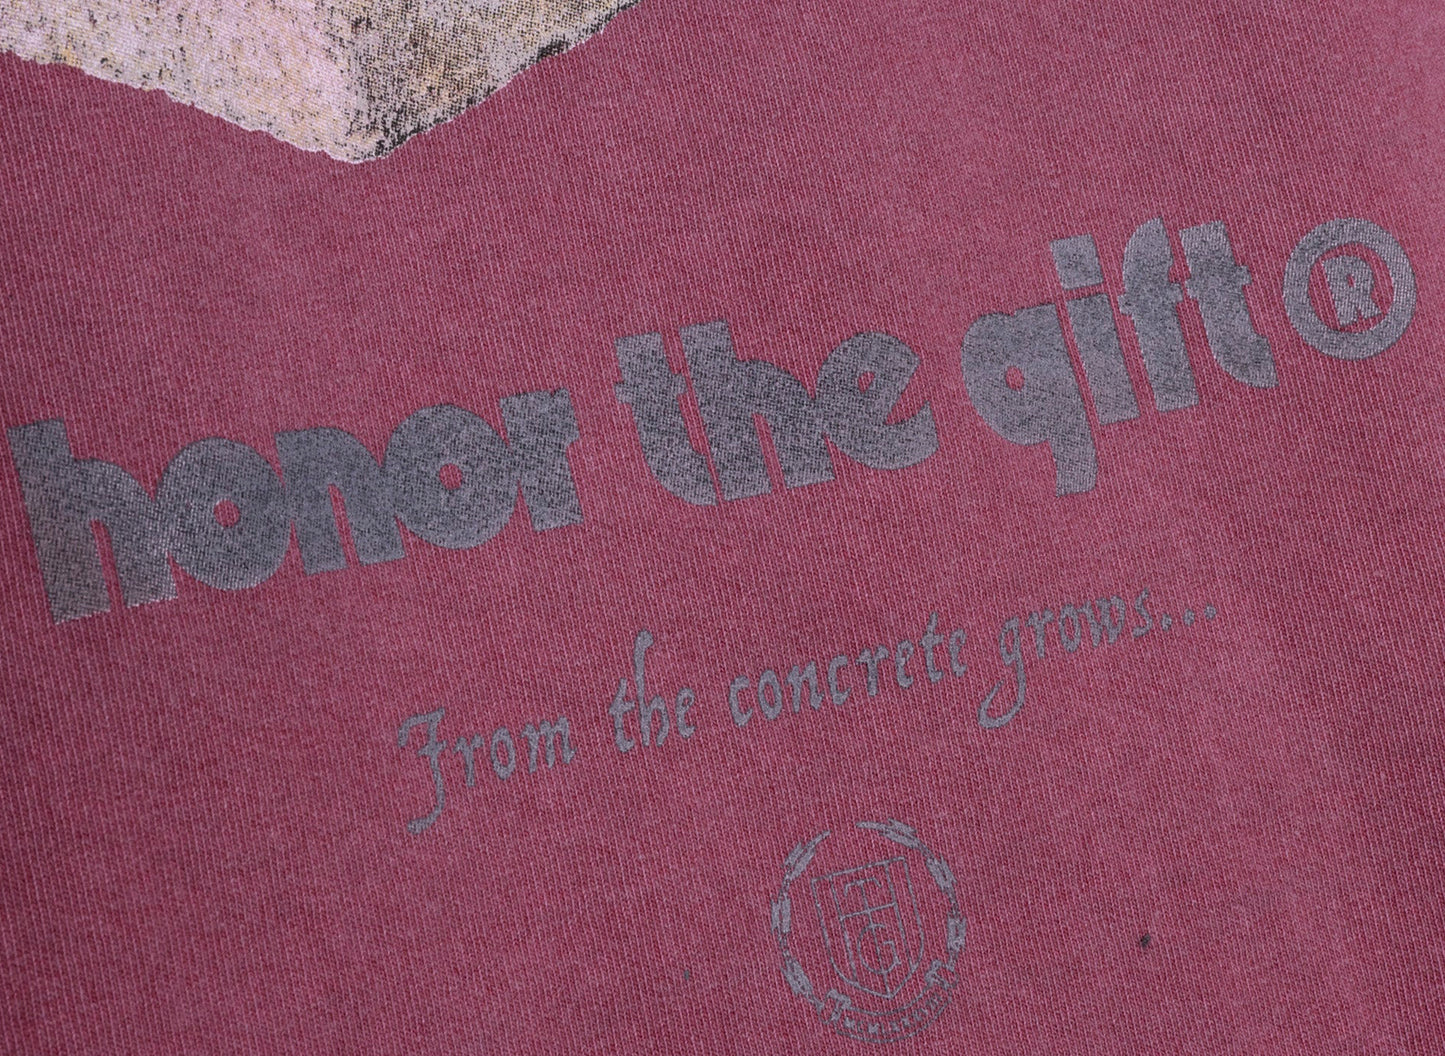 Honor the Gift Concrete 2.0 S/S Tee in Brick Red